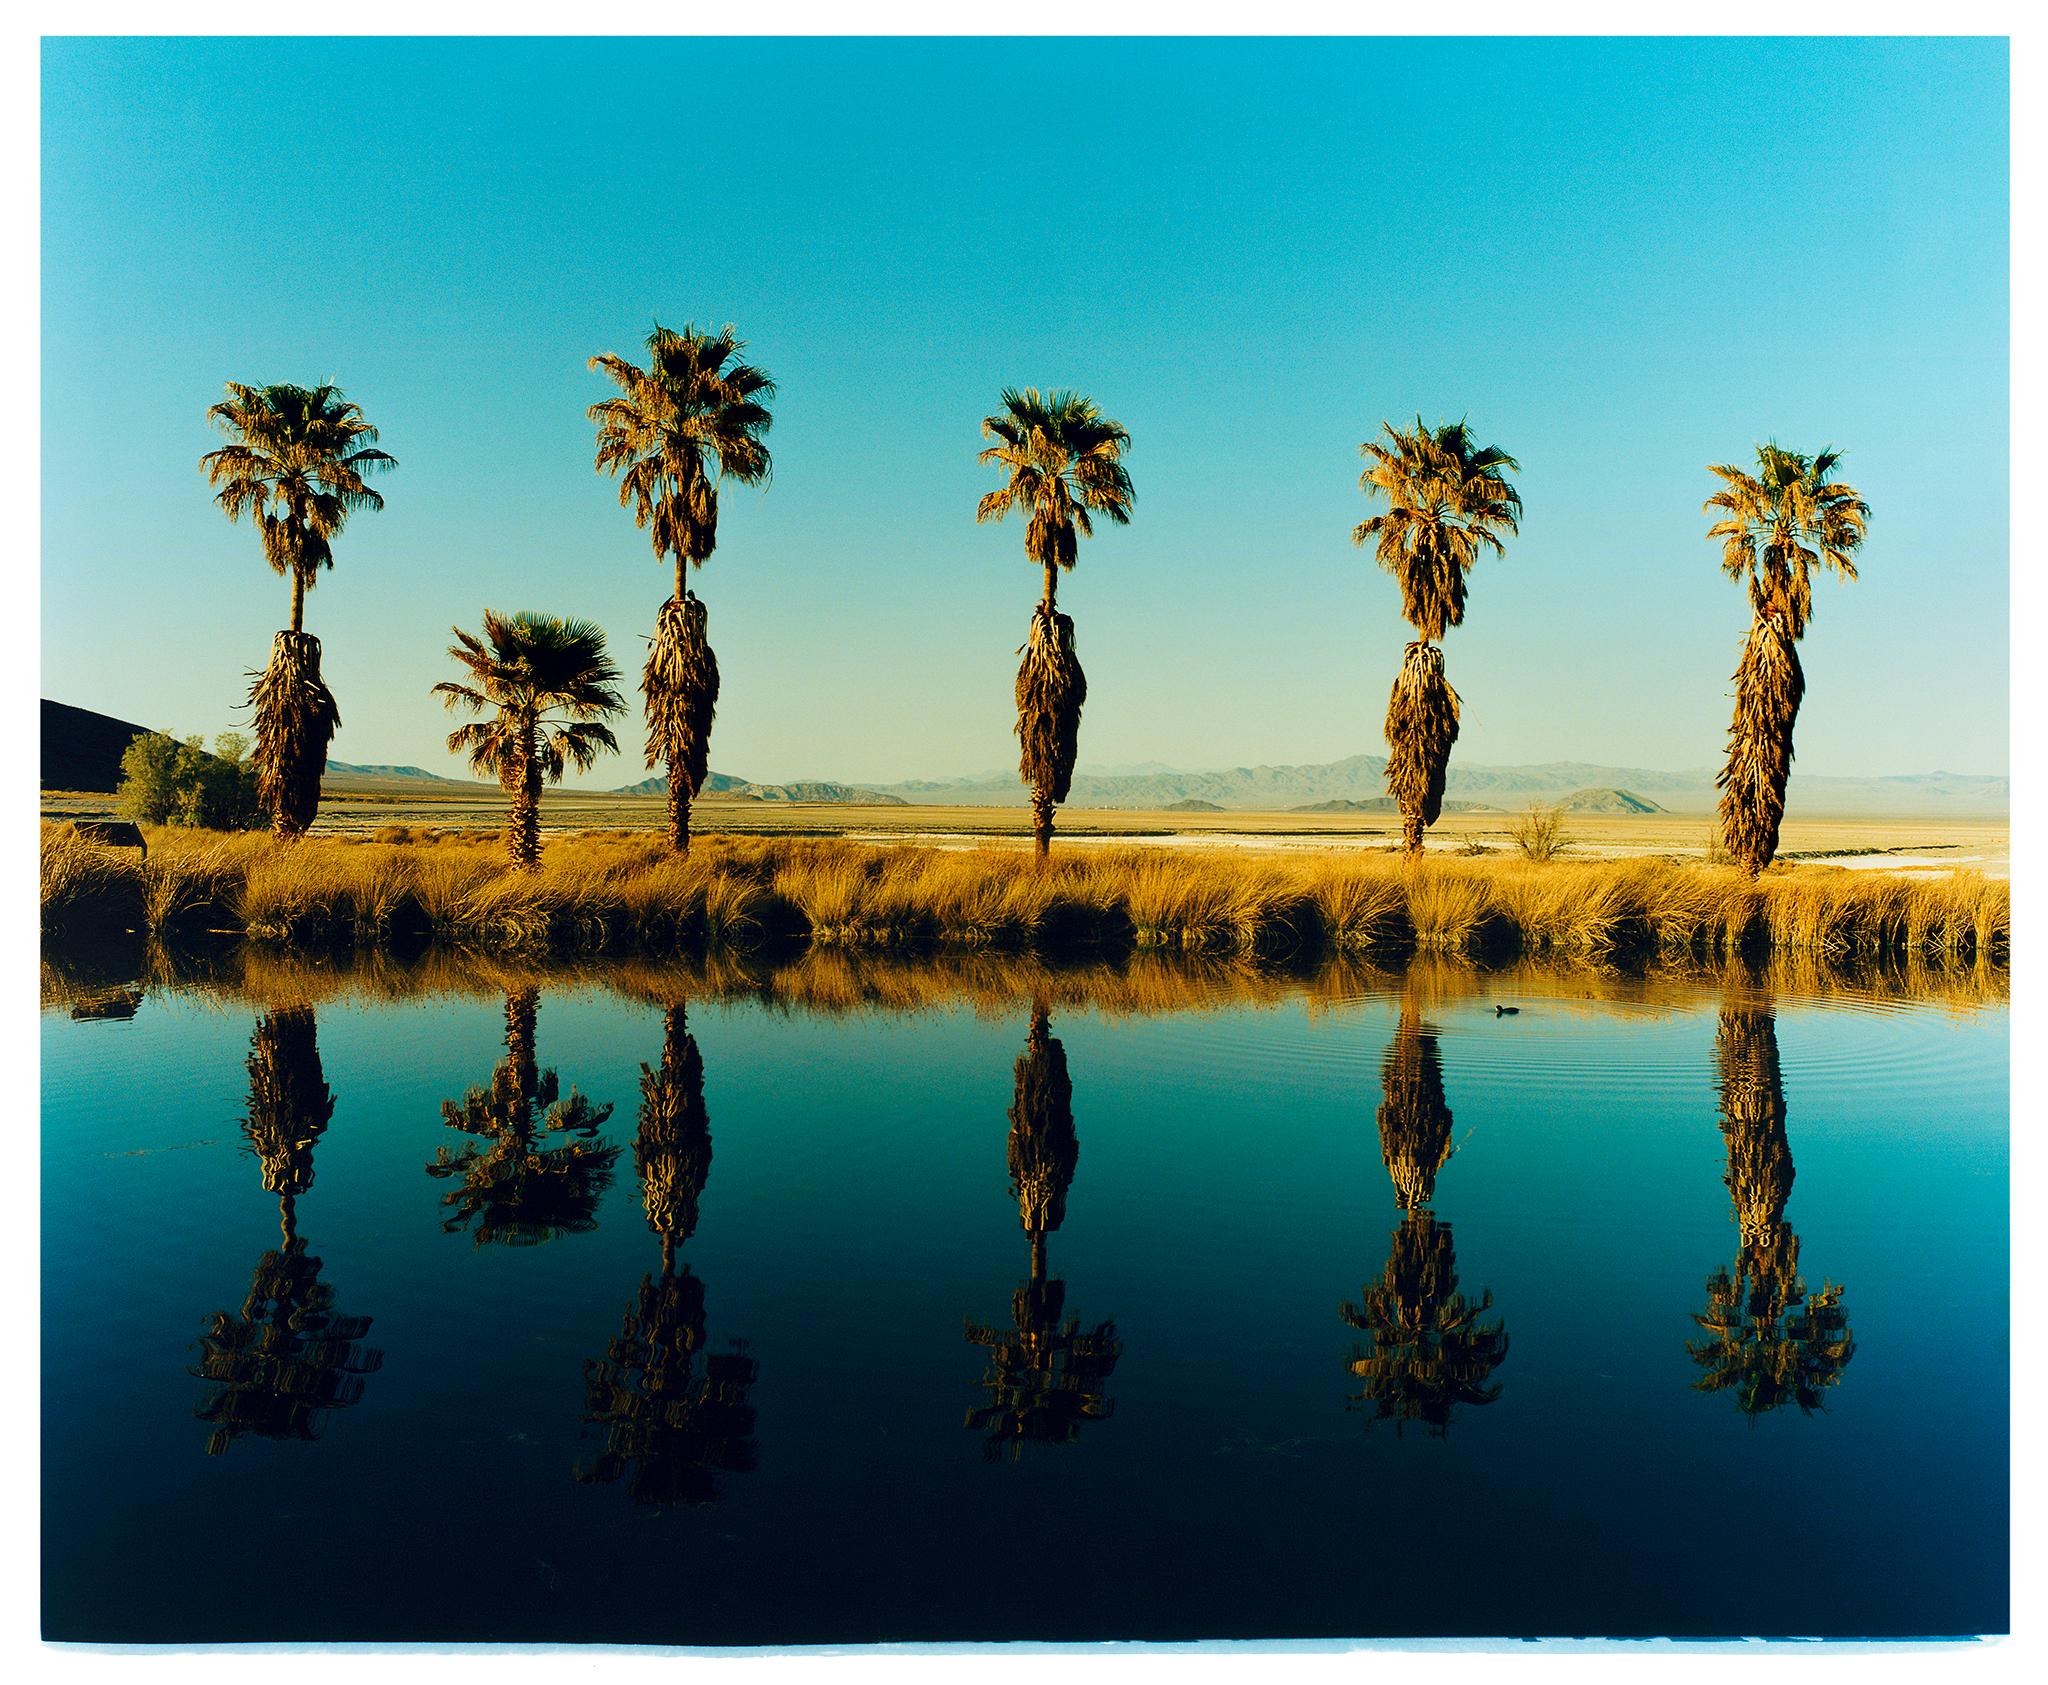 'Zzyzx Resort Pool', photograph from Richard Heeps 'Dream in Colour' Series.
When travelling on a road trip from LA to Las Vegas, Richard was set a challenge to find something interesting on route. In the heart of the Mojave Desert, Richard found